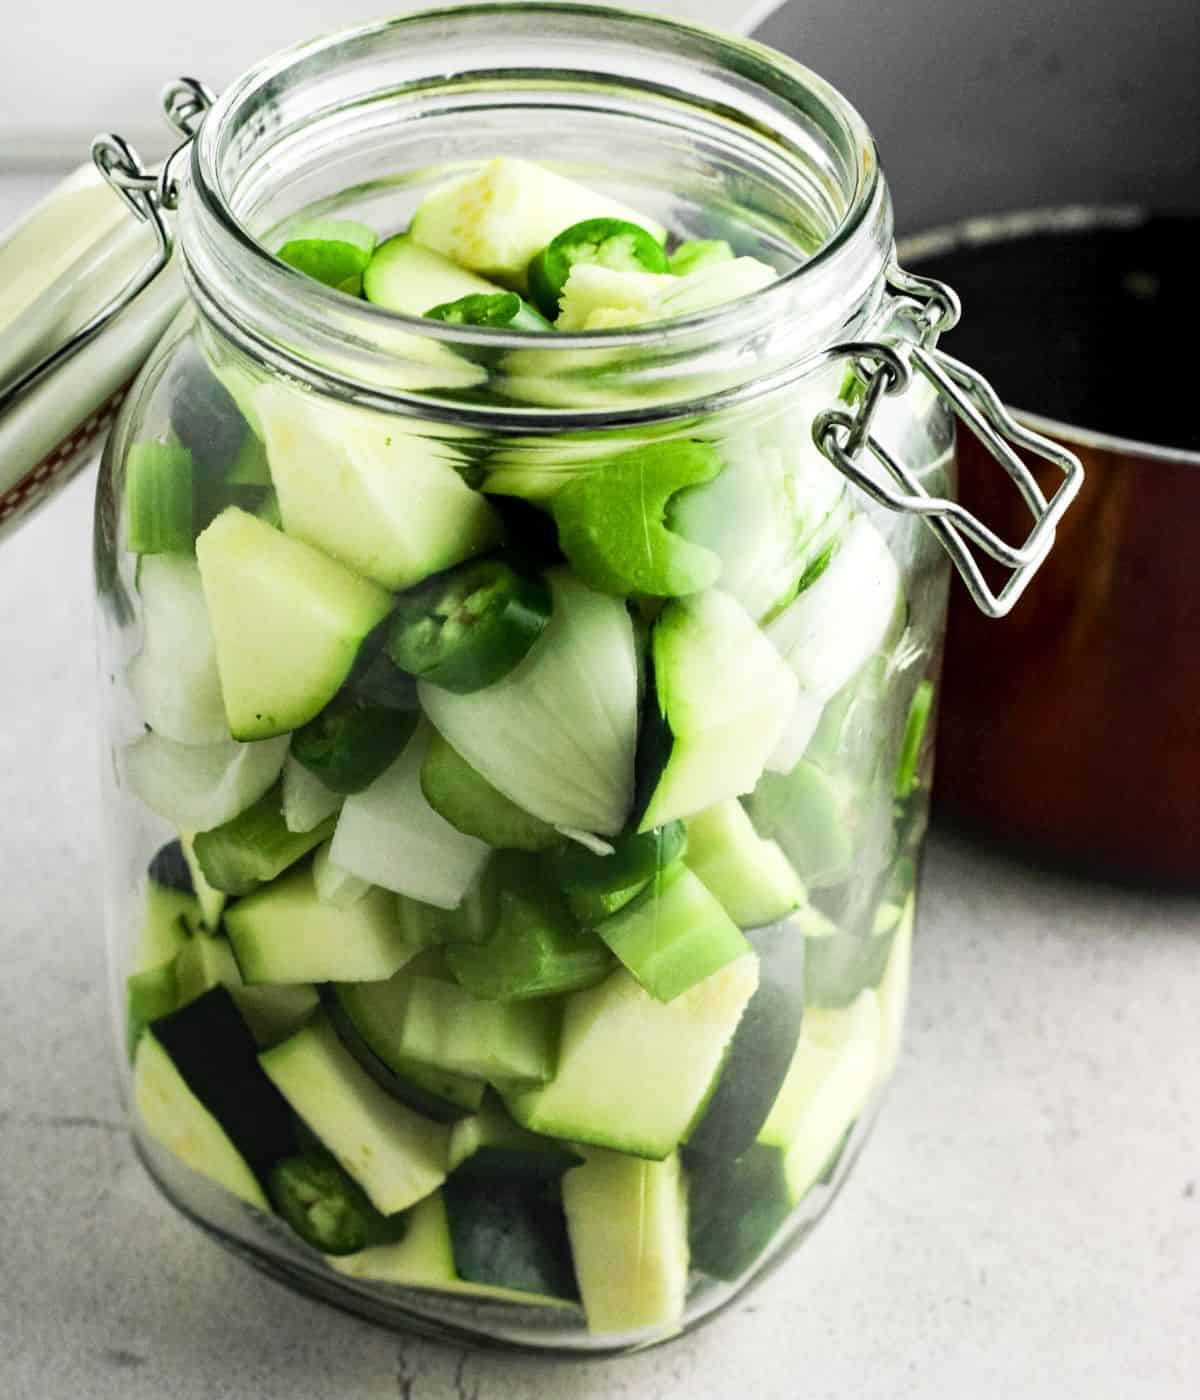 Chopped vegetable in a glass jar.